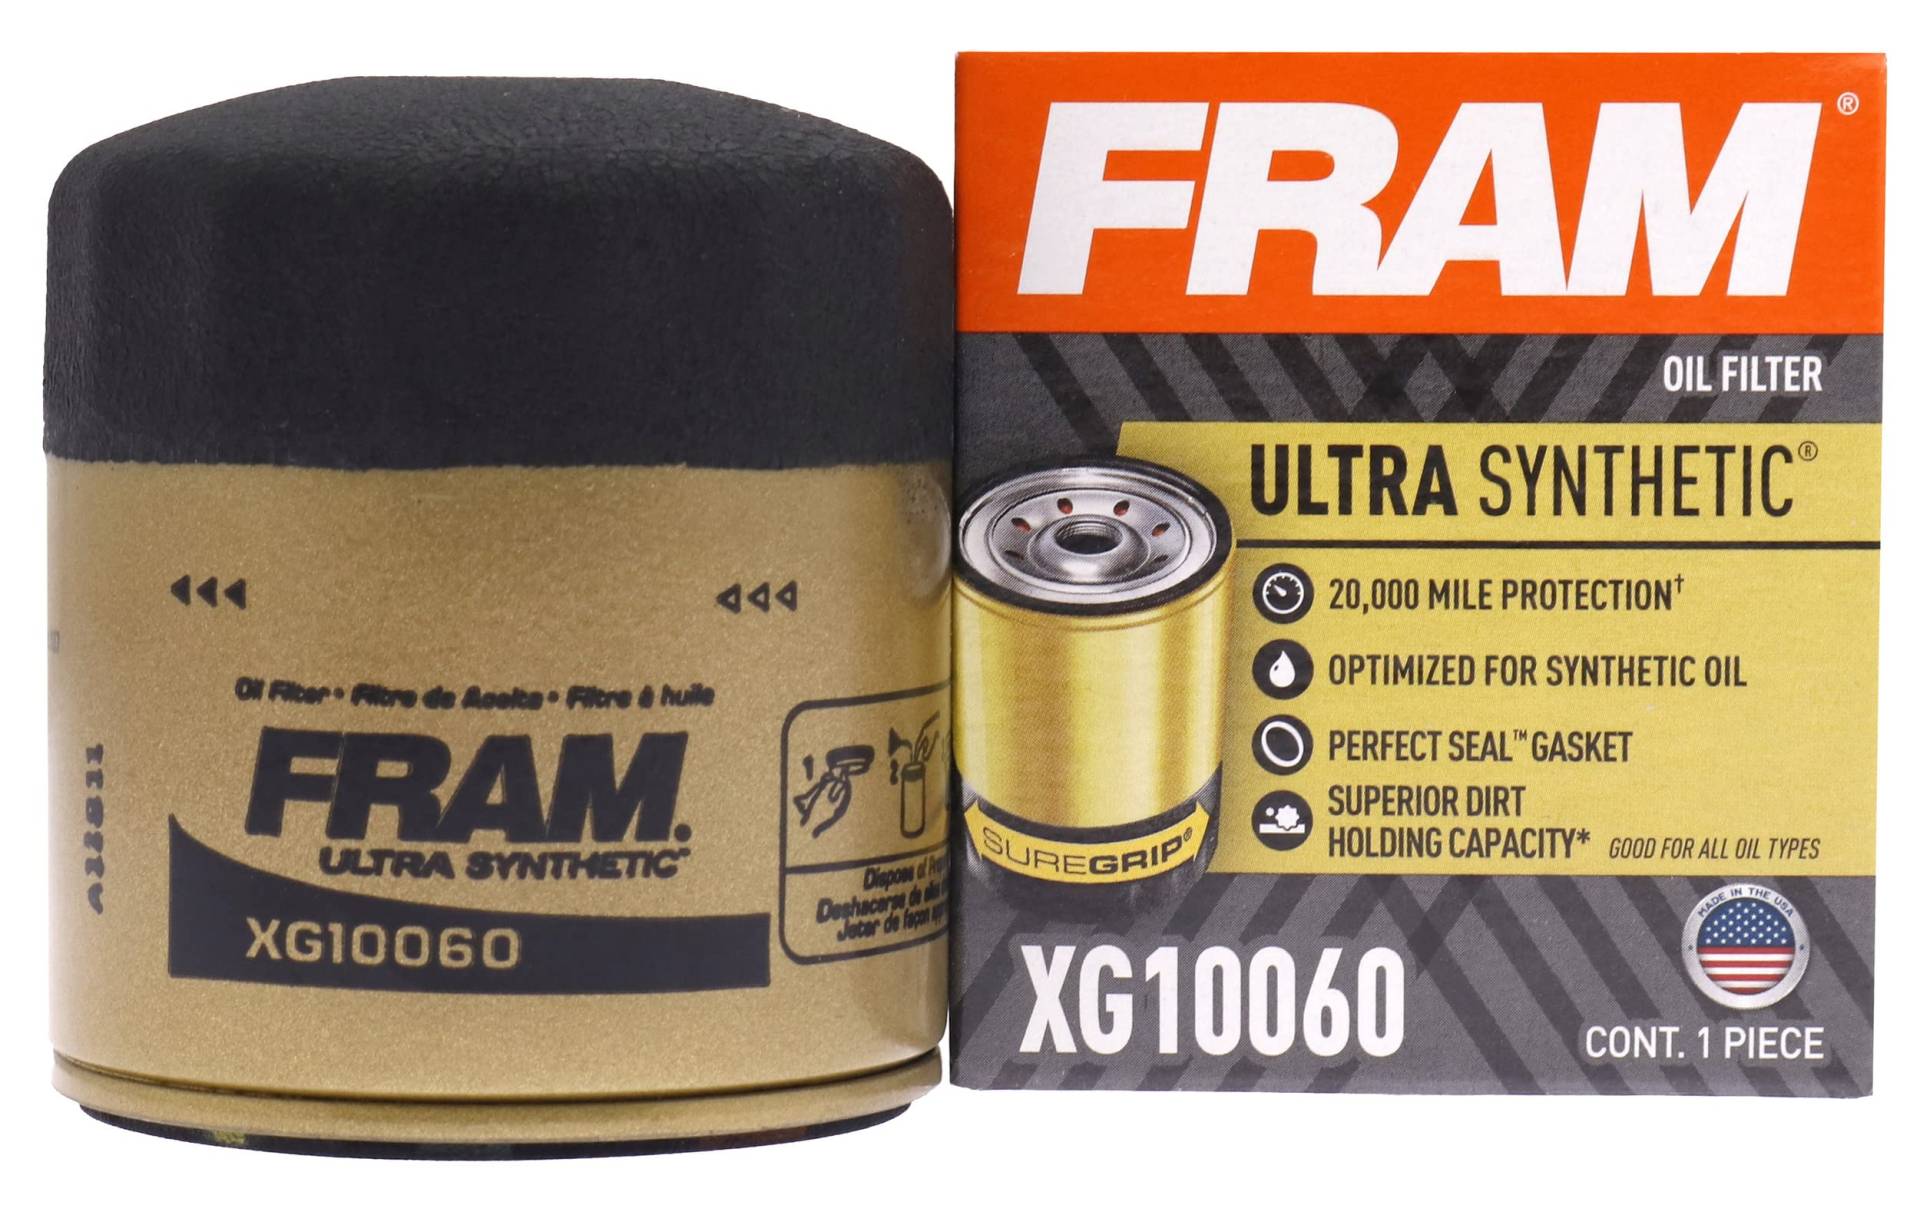 FRAM Ultra Synthetic 20.000 Mile Protection Oil Filter XG10060 with SureGrip (1 Stück) von Fram